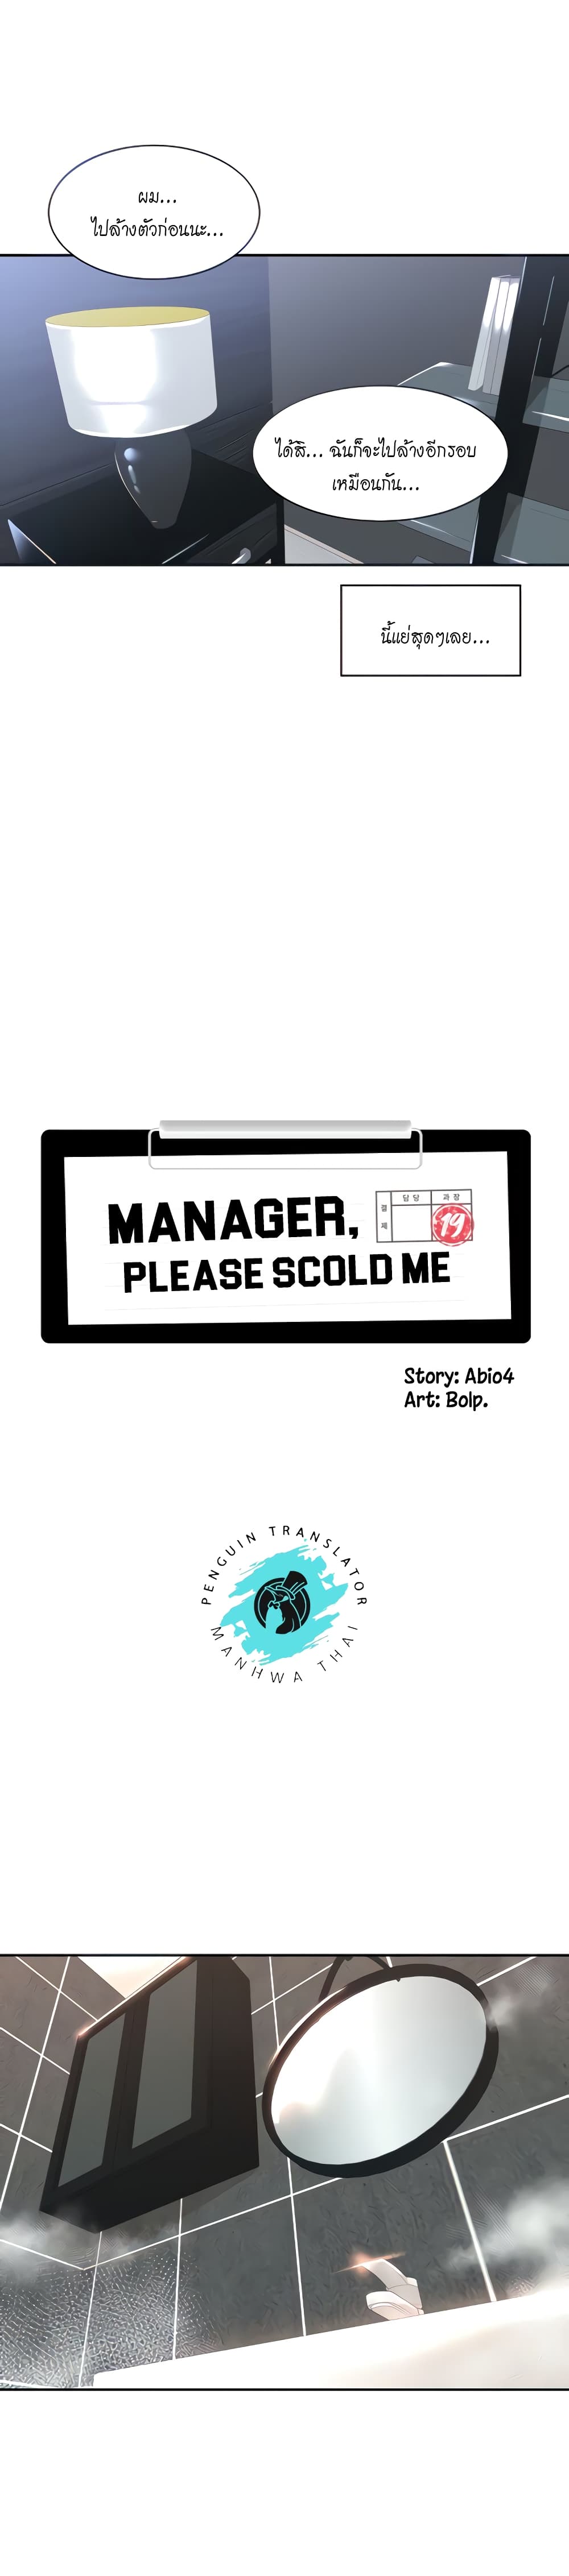 Manager, Please Scold Me 4-4